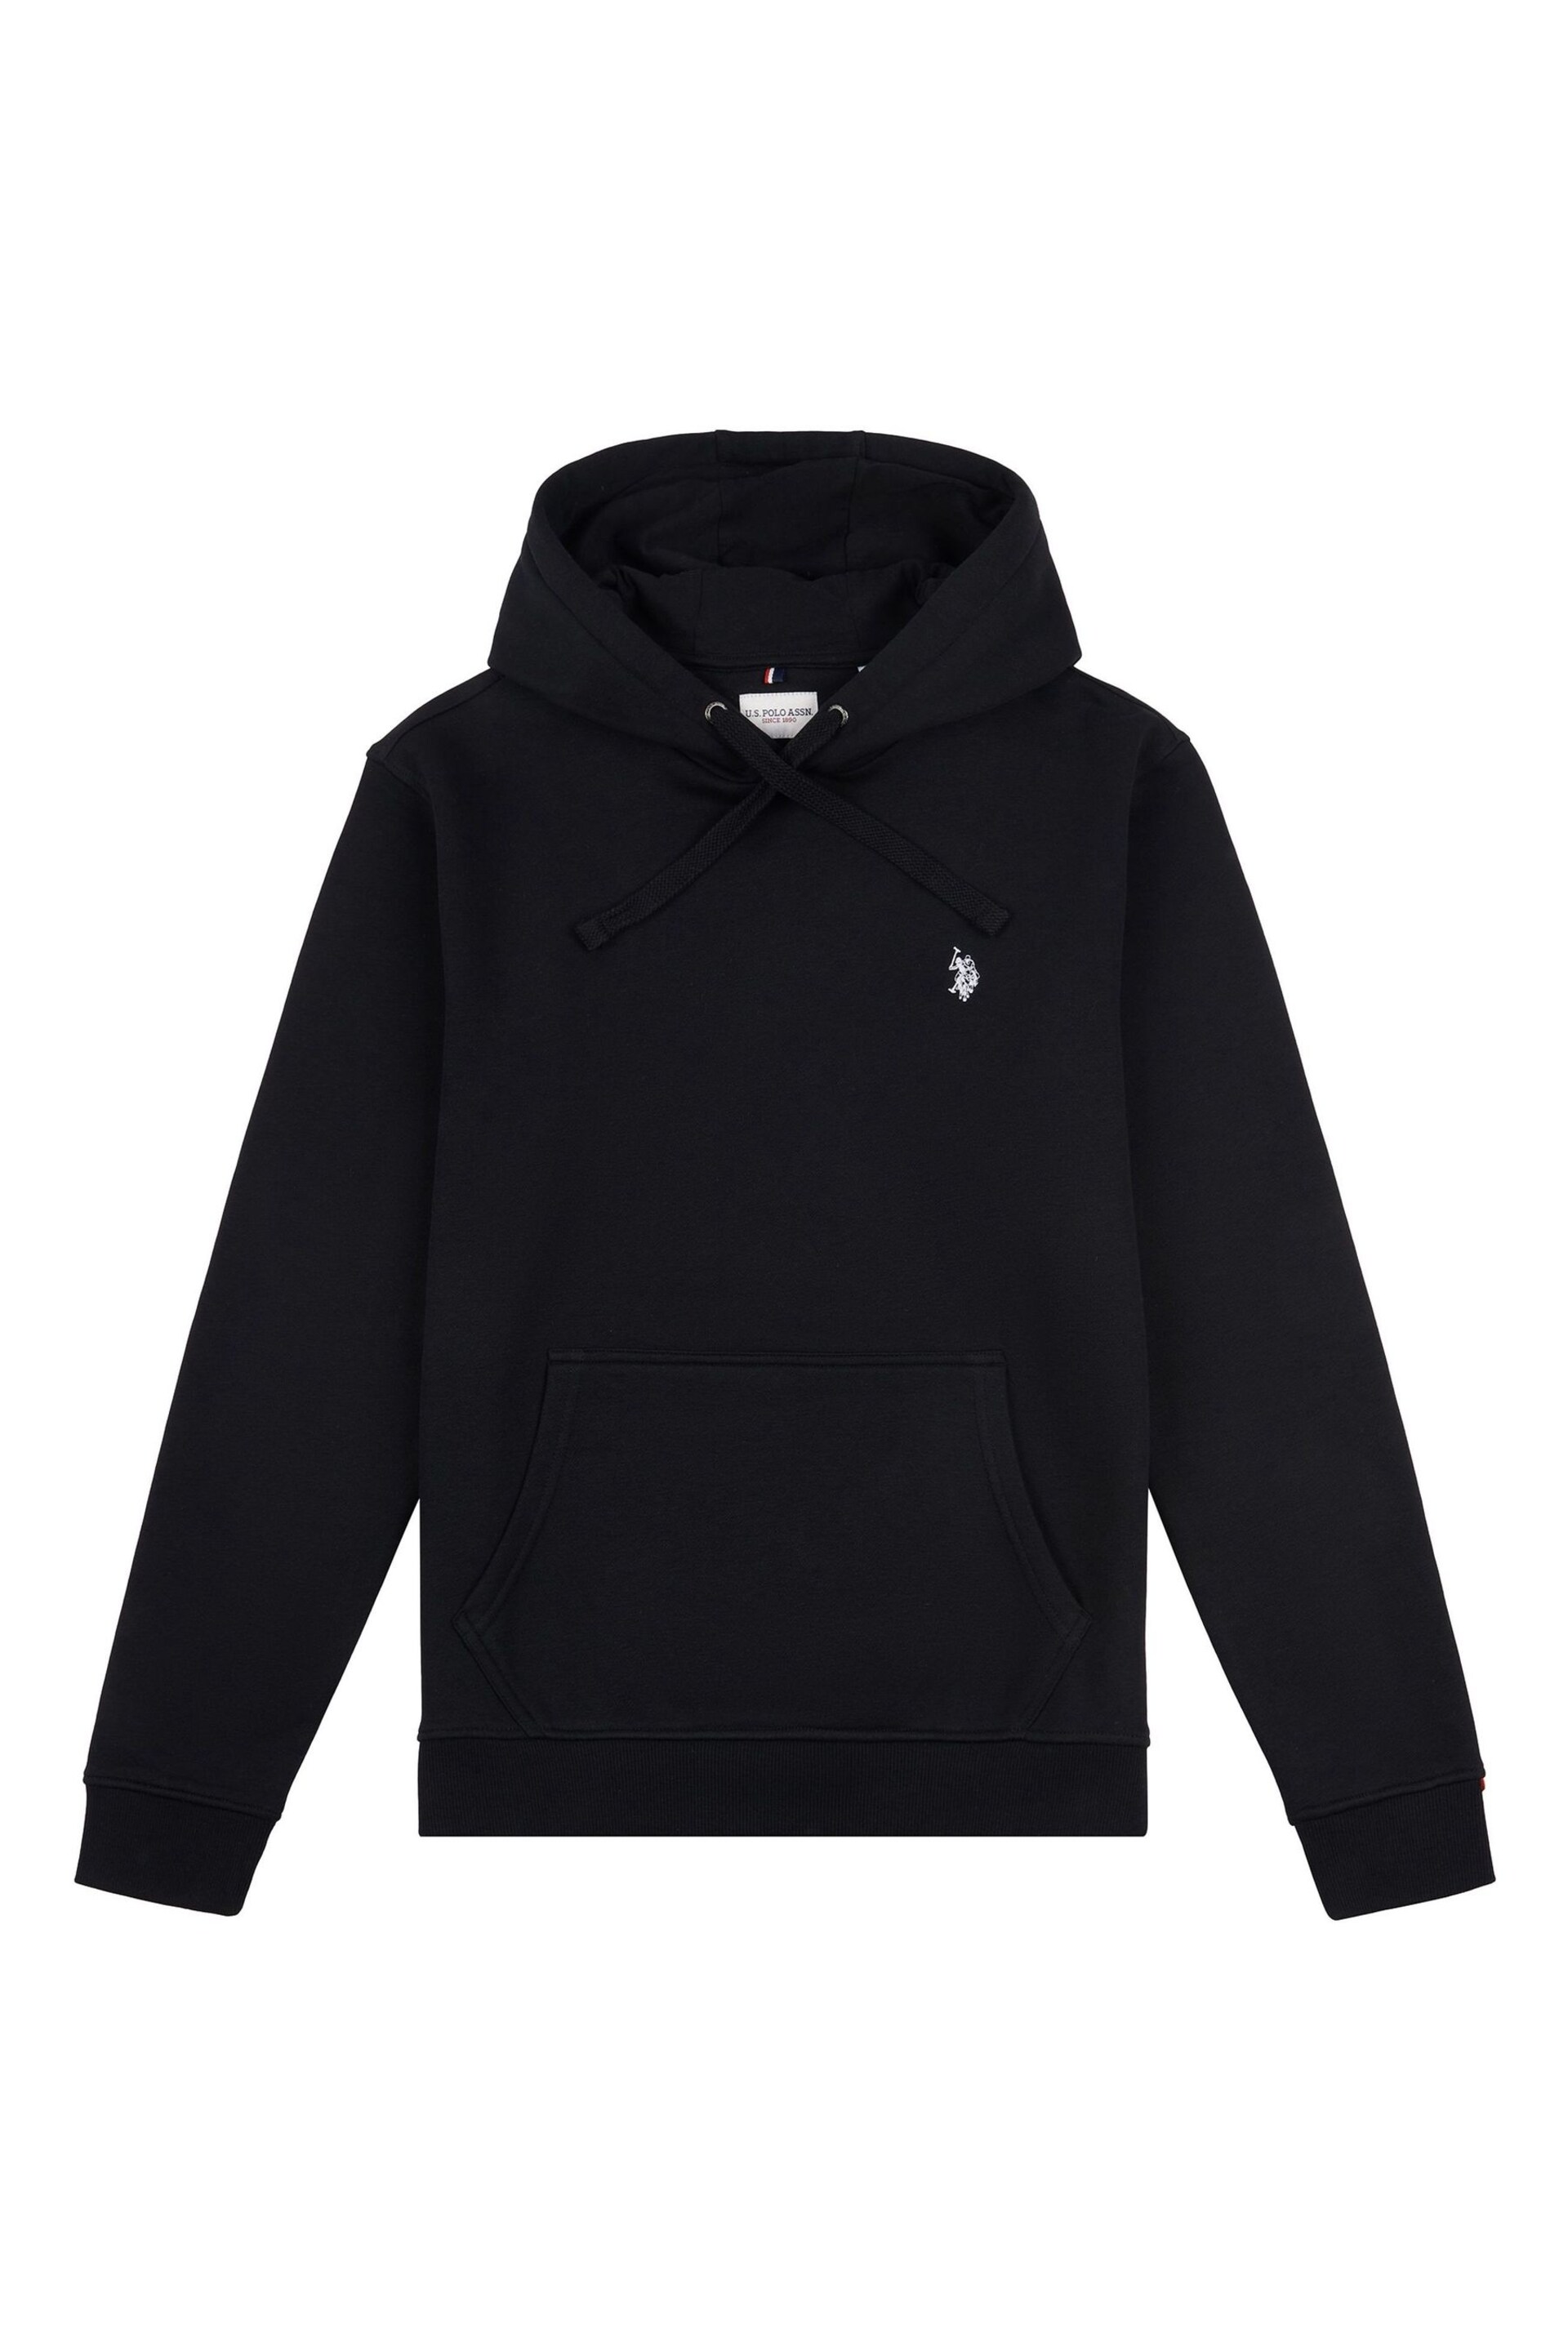 U.S. Polo Assn. Mens Classic Fit Double Horsemen Hoodie - Image 5 of 6